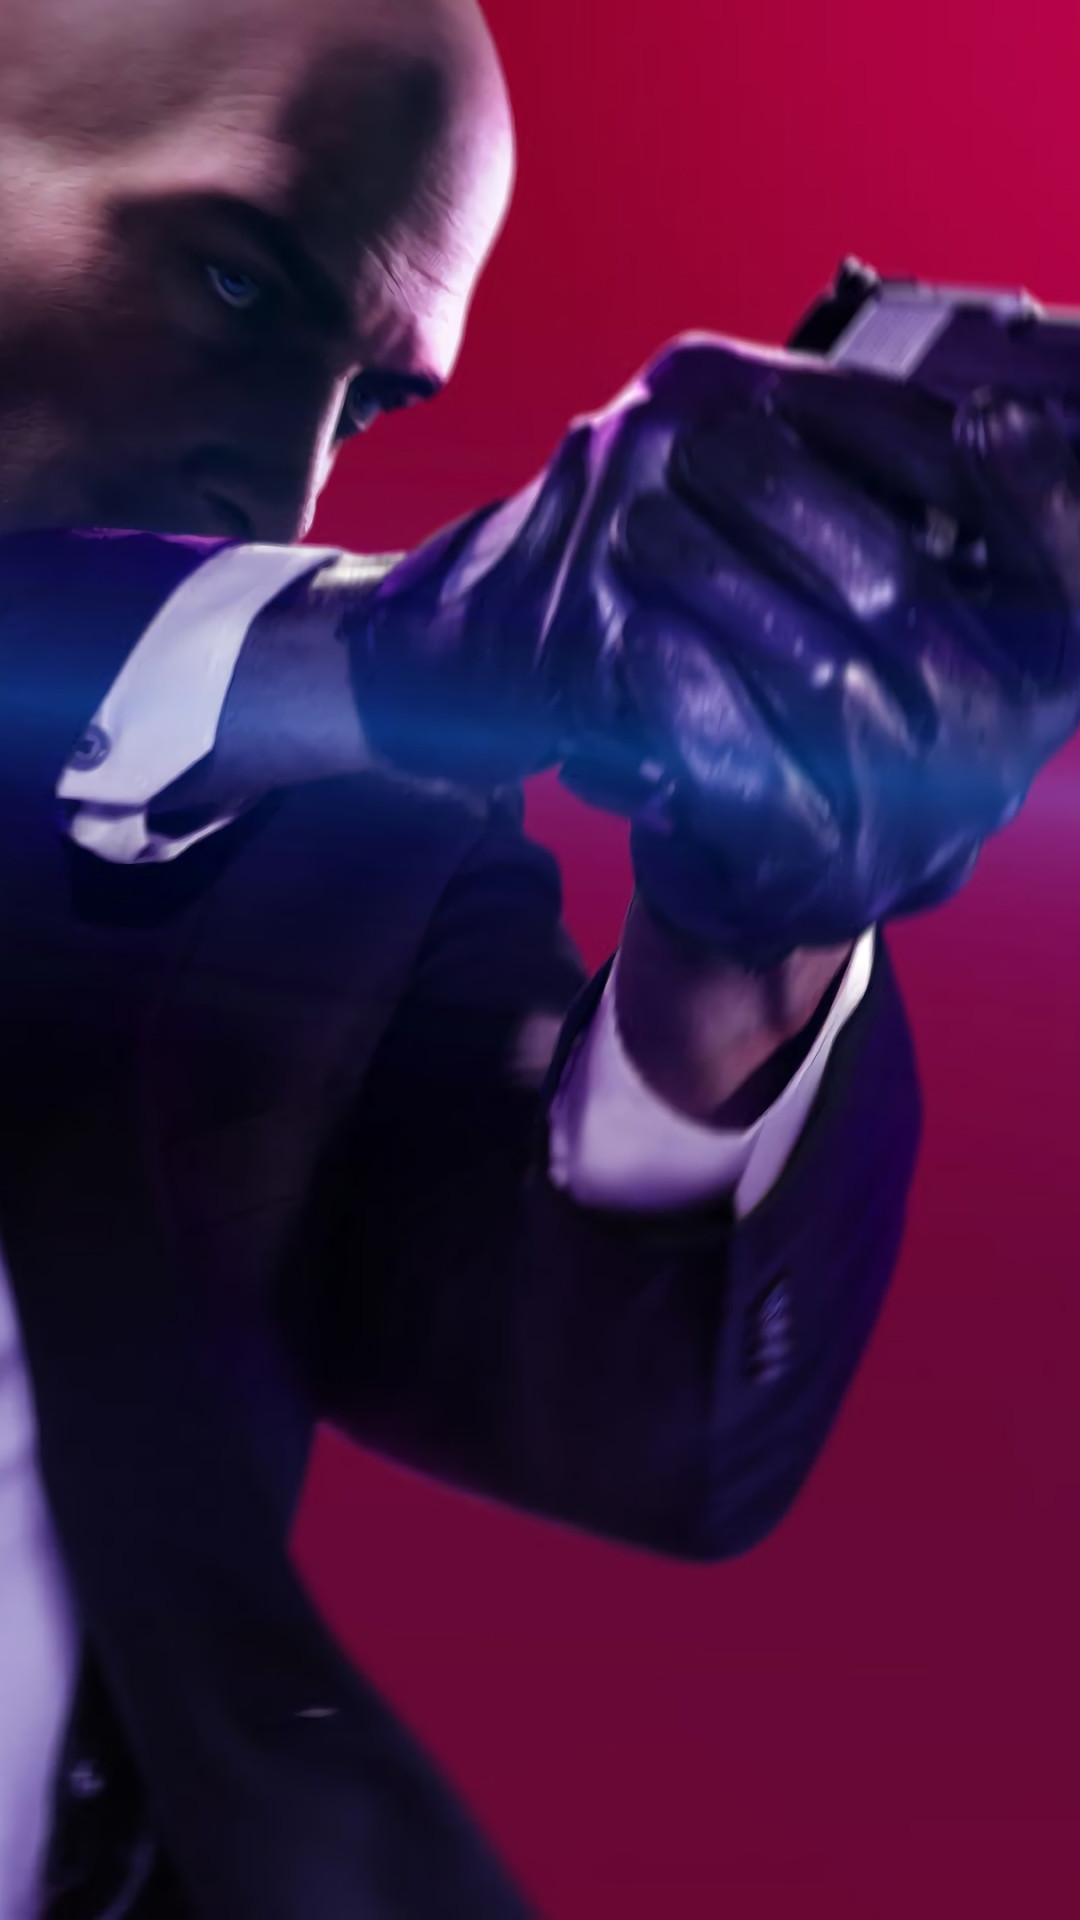  Hitman 2 HQ Background Images